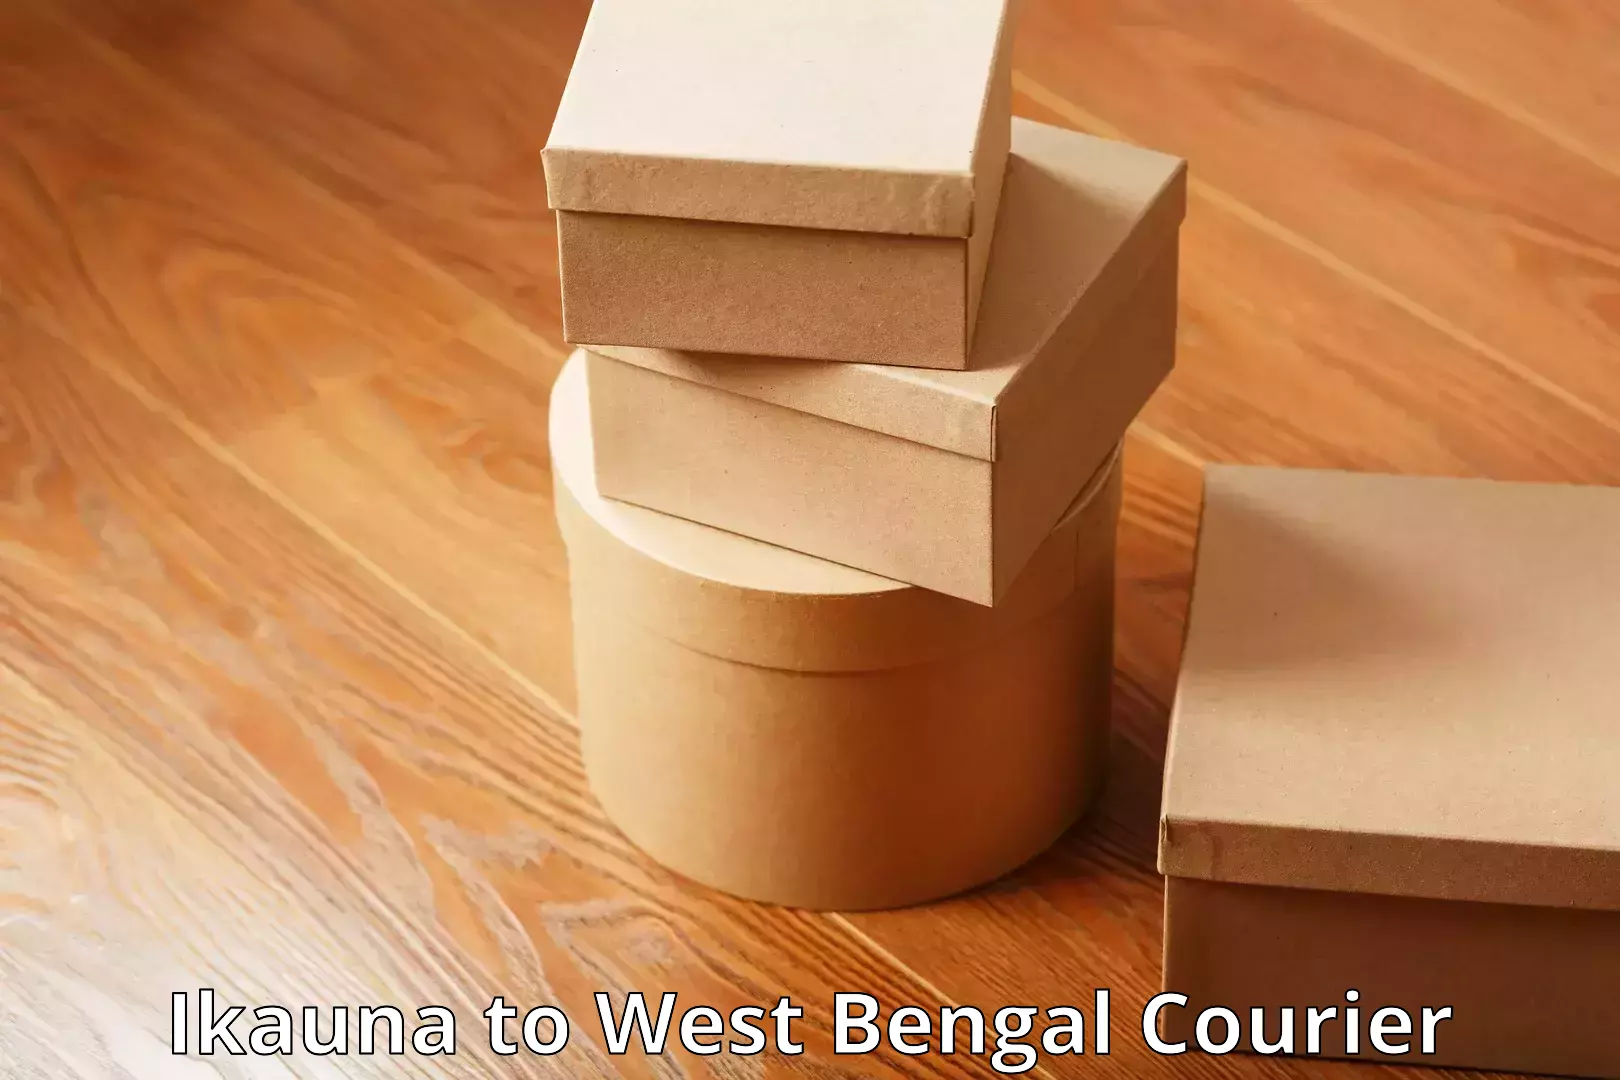 Baggage transport network Ikauna to West Bengal